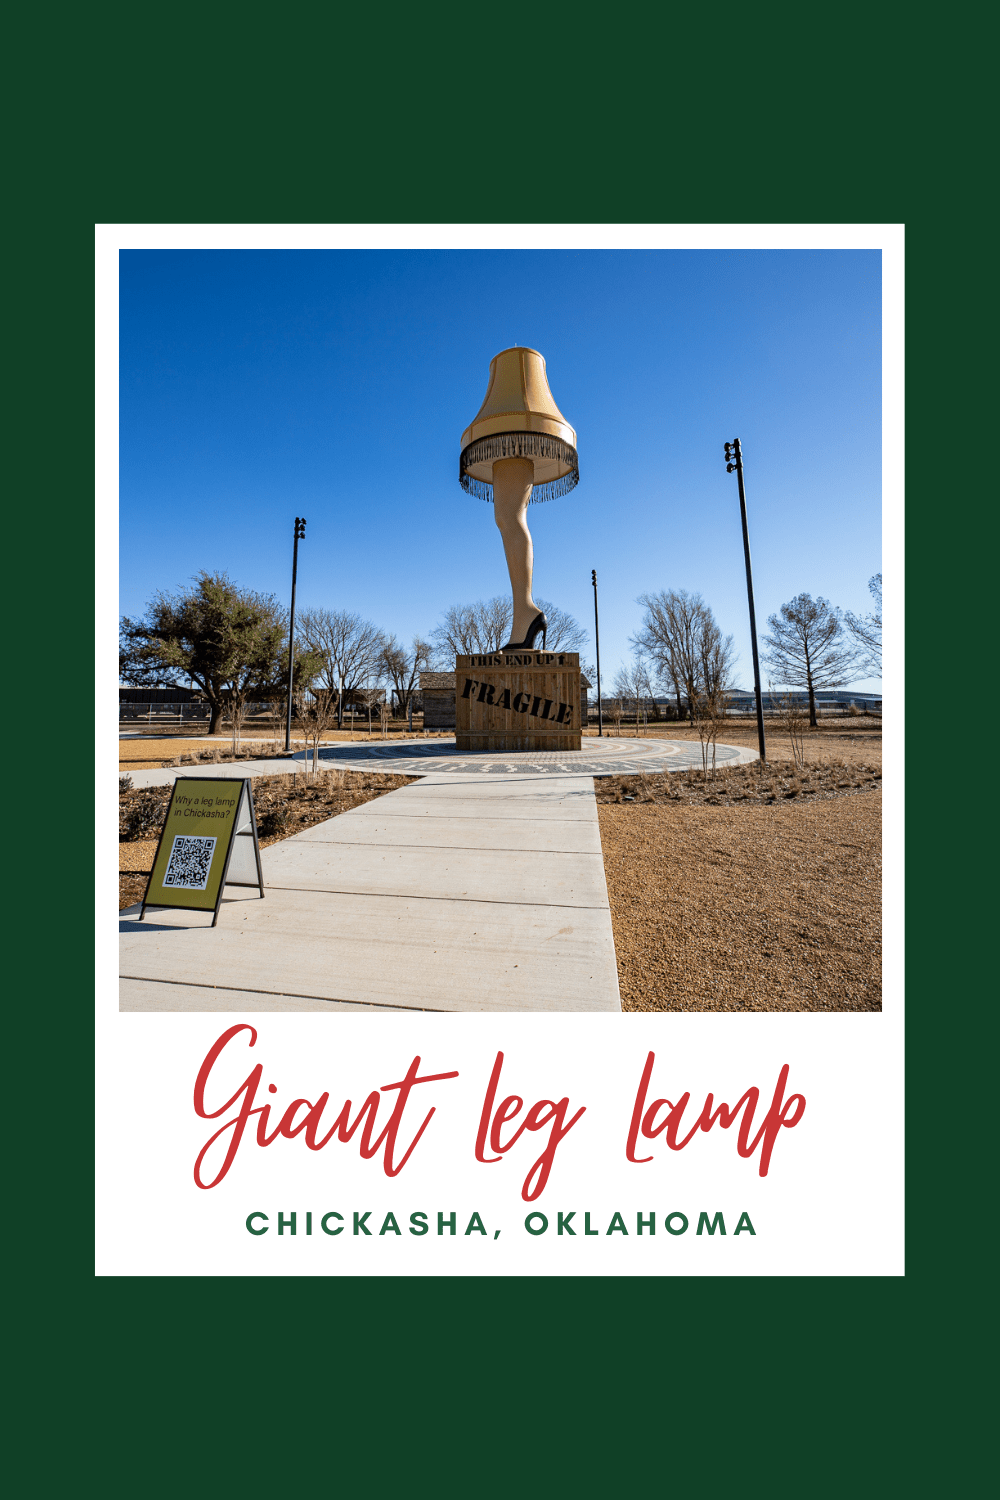 This roadside attraction is so very fraa-jeel-aay you might think you'd find it in Italy. But you'll actually find it in Oklahoma. If you love the movie A Christmas Story, you'll love the Giant Leg Lamp in Chickasha, Oklahoma. Visit this Oklahoma roadside attraction on your holiday road trip or any time of year! It's a fun road trip stop! #RoadTrip #RoadsideAttraction #RoadsideAmerica #AChristmasStory #Christmas